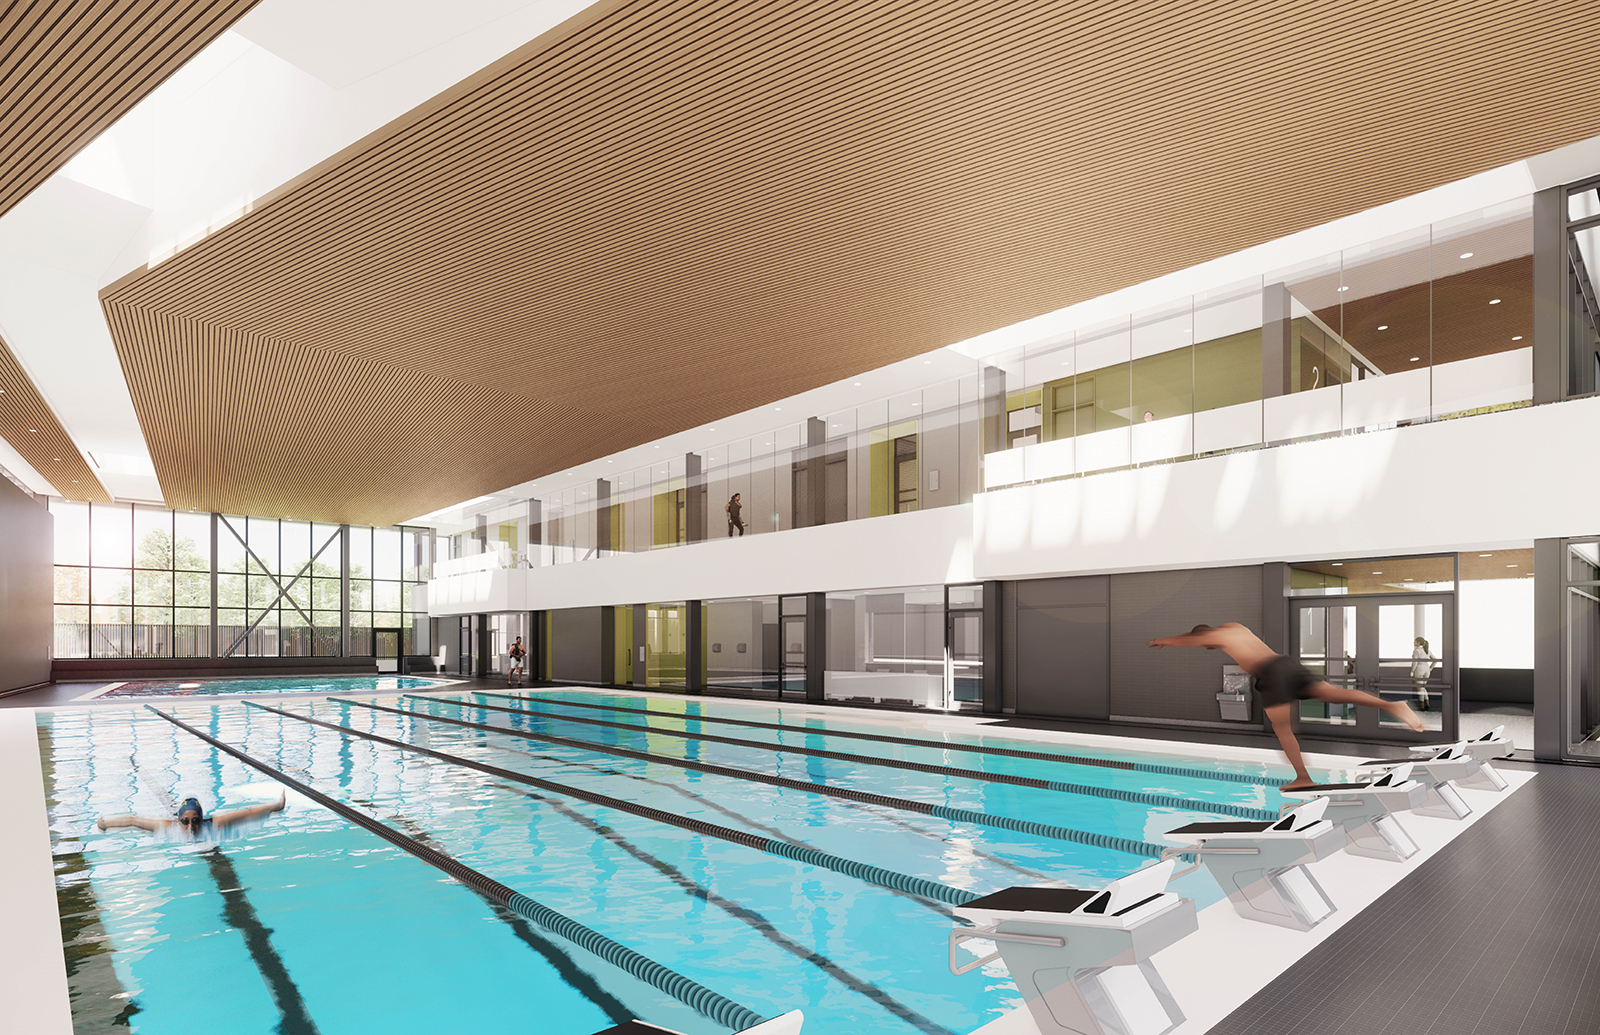 A rendering of the aquatic centre, with the lane pool with diving blocks in the foreground, and leisure pool in the background. The leisure pool has an accessible beach entrance. The lane pool has an accessible ramp entrance and a hoist (not pictured). The roof is slatted wood with natural light coming into the space through the rooftop as well as the north, west, and south walls. There is a grey deck around the pools. There are glass walls along the east wall, with views into the second floor hallway and viewing areas, and the main floor change rooms, showers, and lobby. Not pictured is the leisure pool water-play feature, the lane pool accessible hoist, and lifeguard stations. People are actively using the pool space in this image.